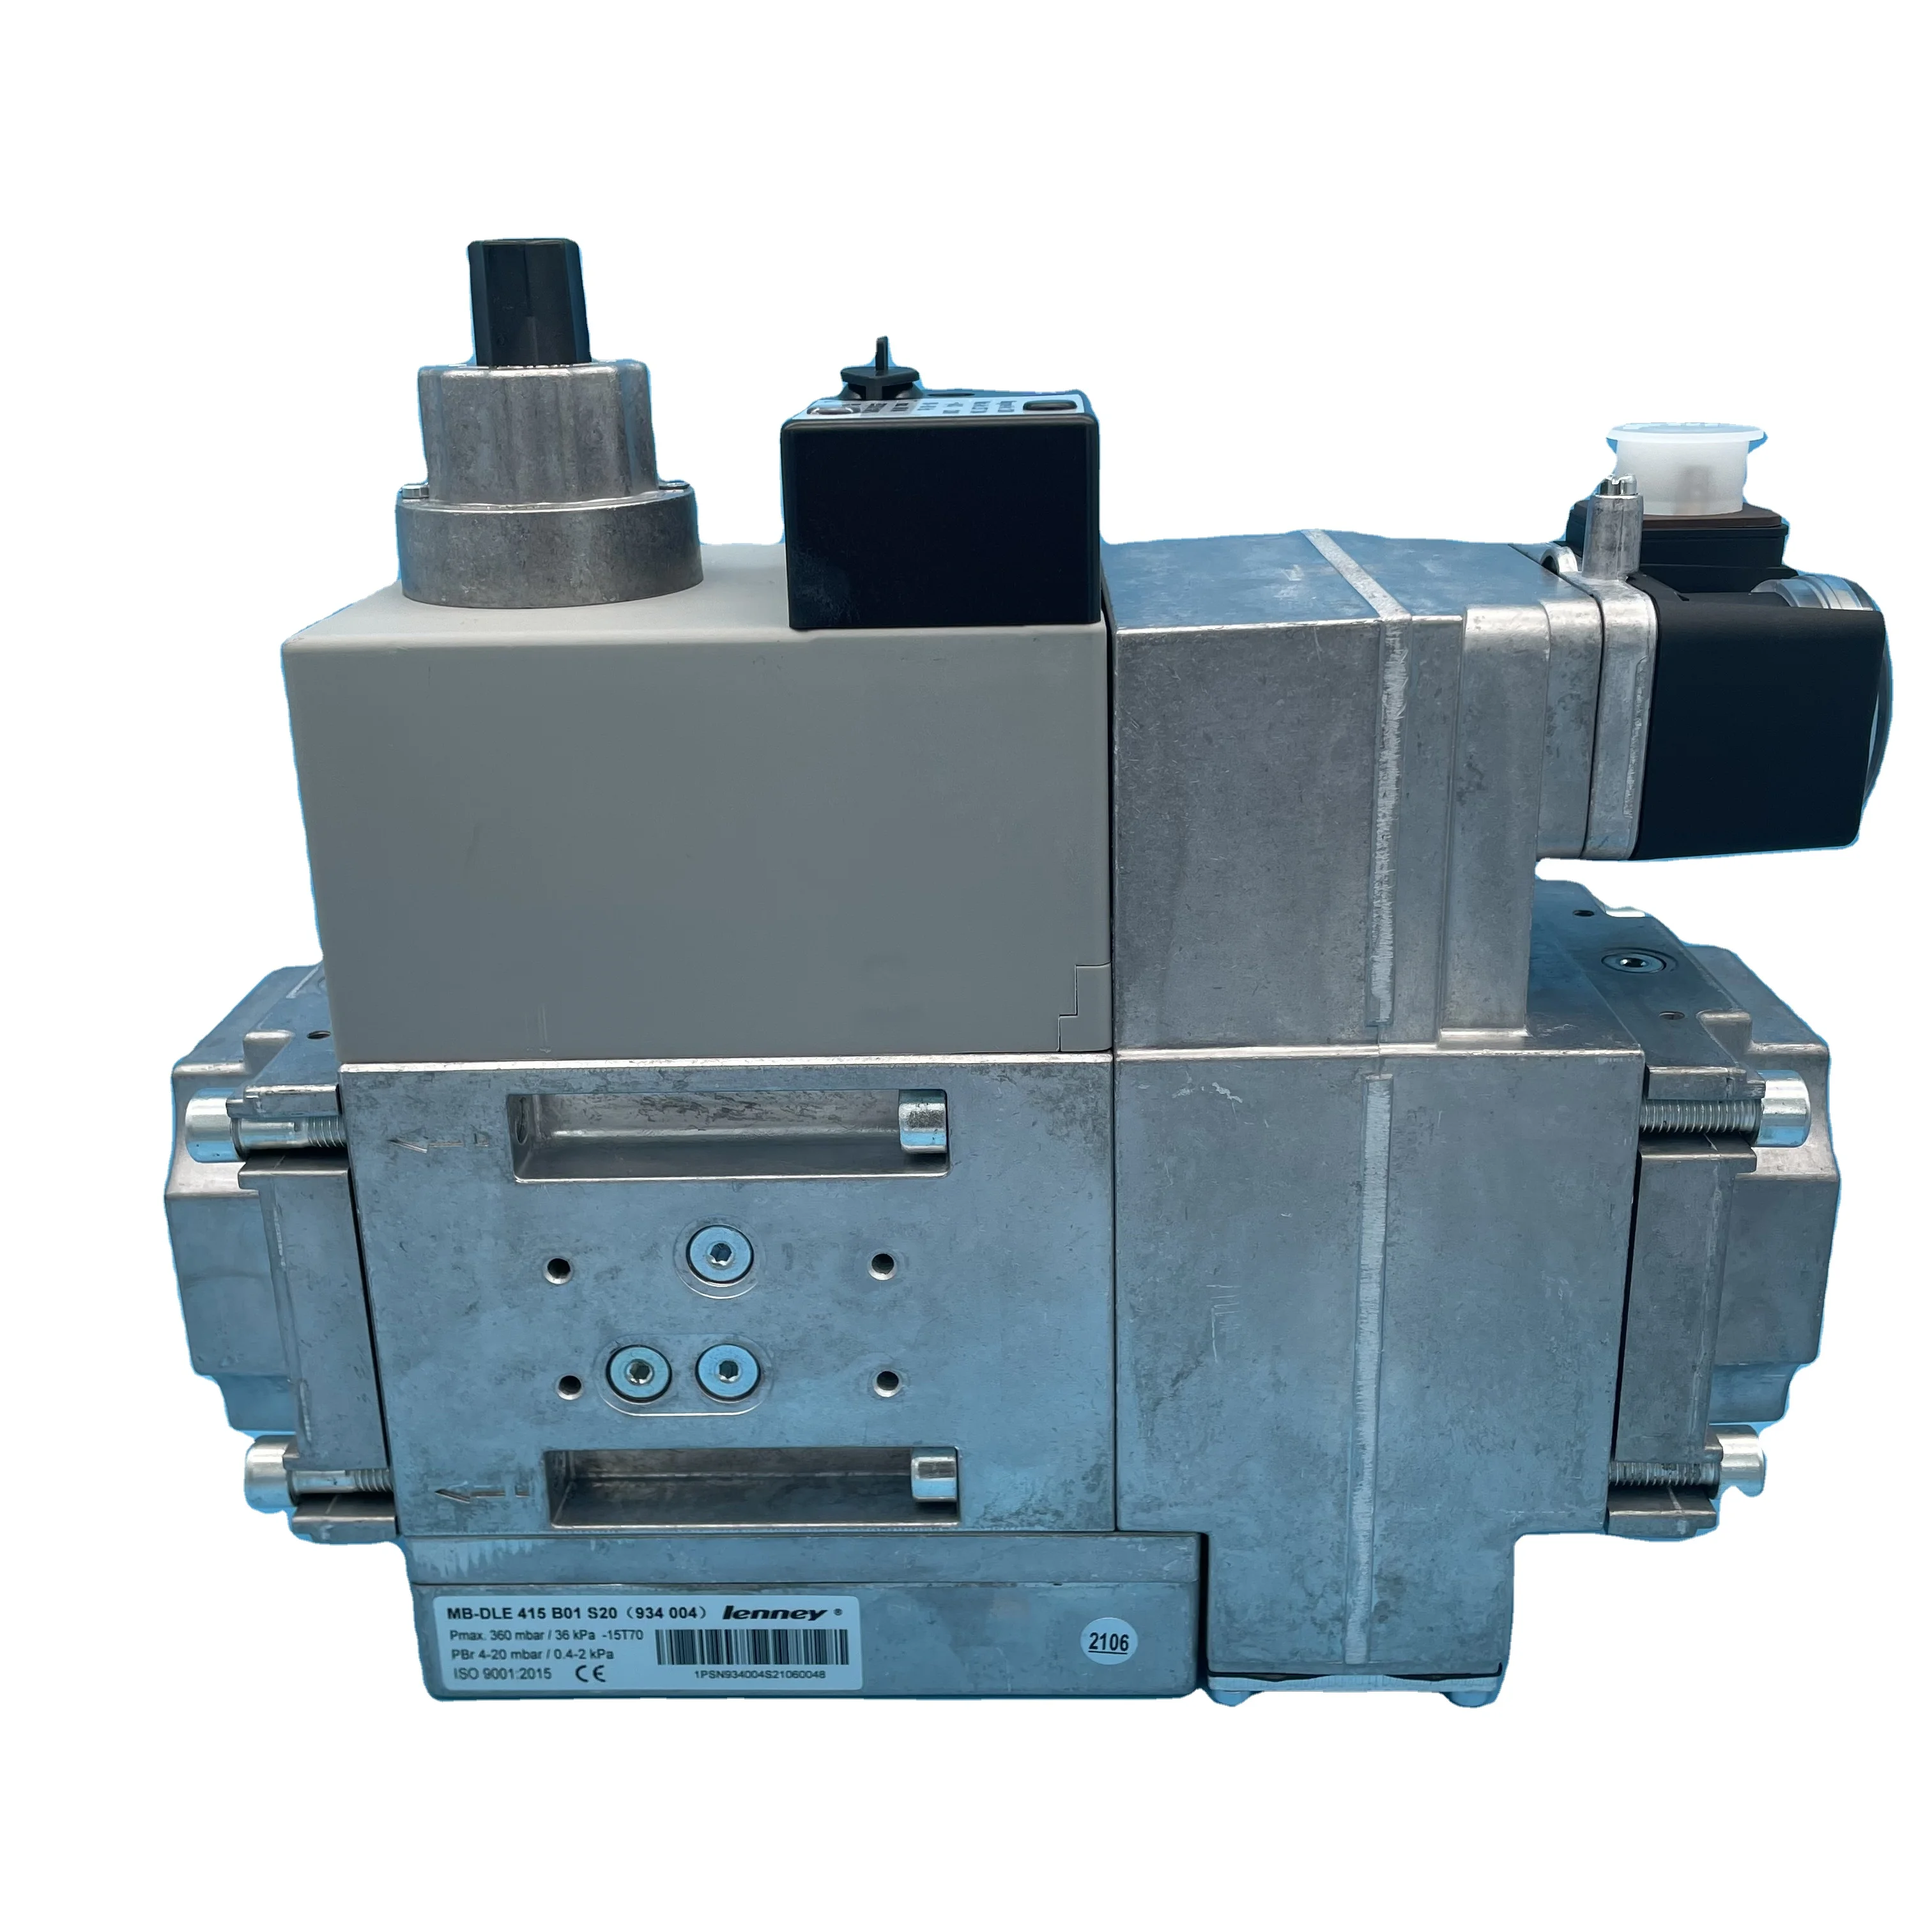 

Dungs Combined Solenoid Valve MB-DLE Series Gas Valve For Safety Shutdown And Control Functions